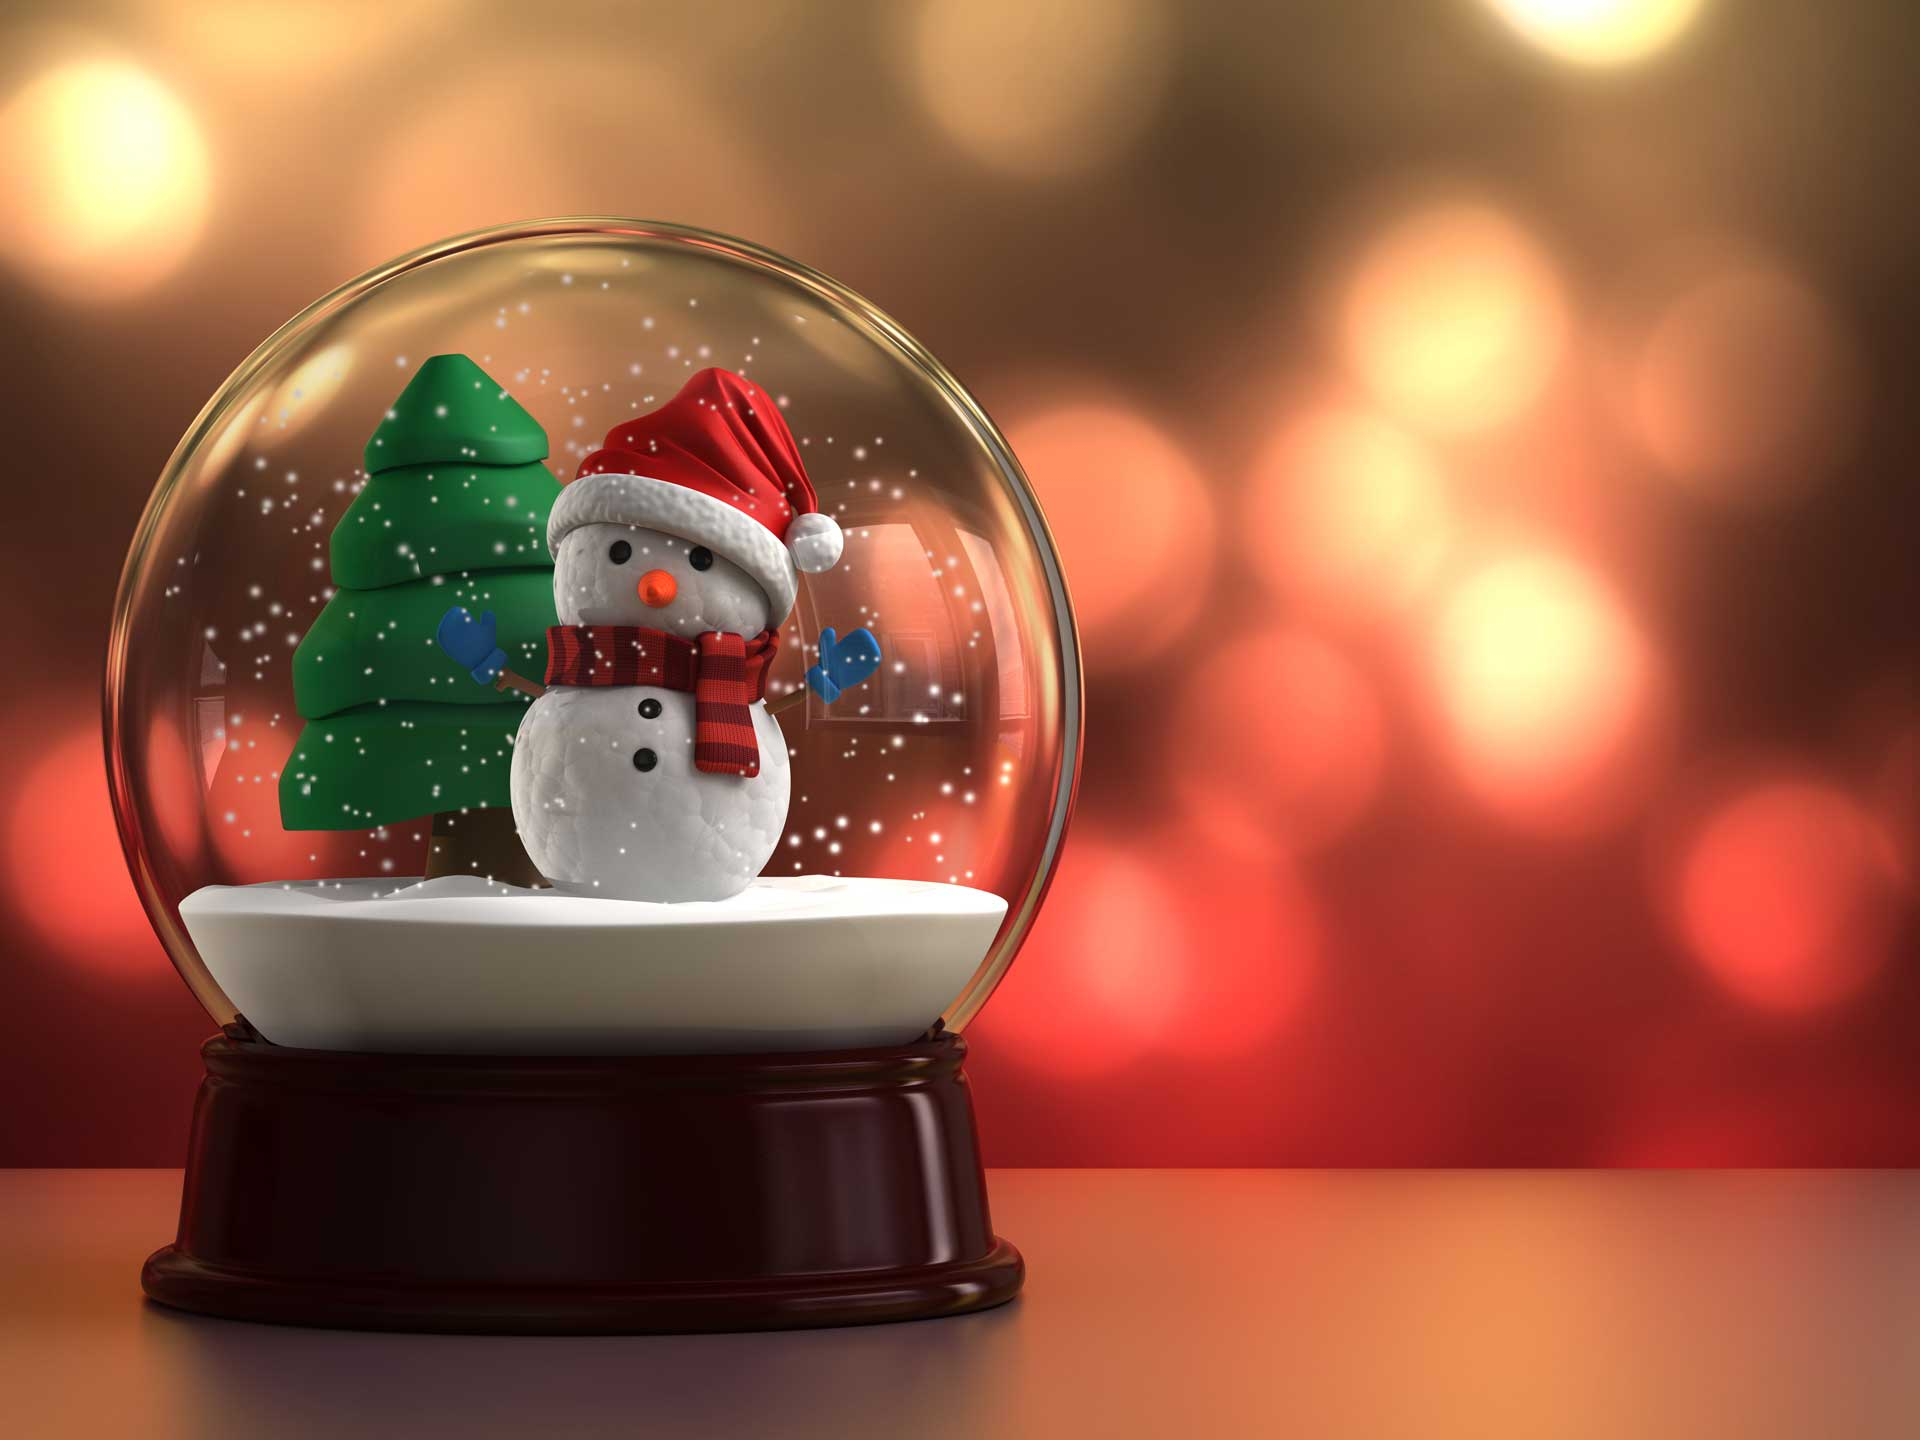 1920x1440 Christmas Snow Globes Wallpapers Top Free Christmas Snow Globes Backgrounds